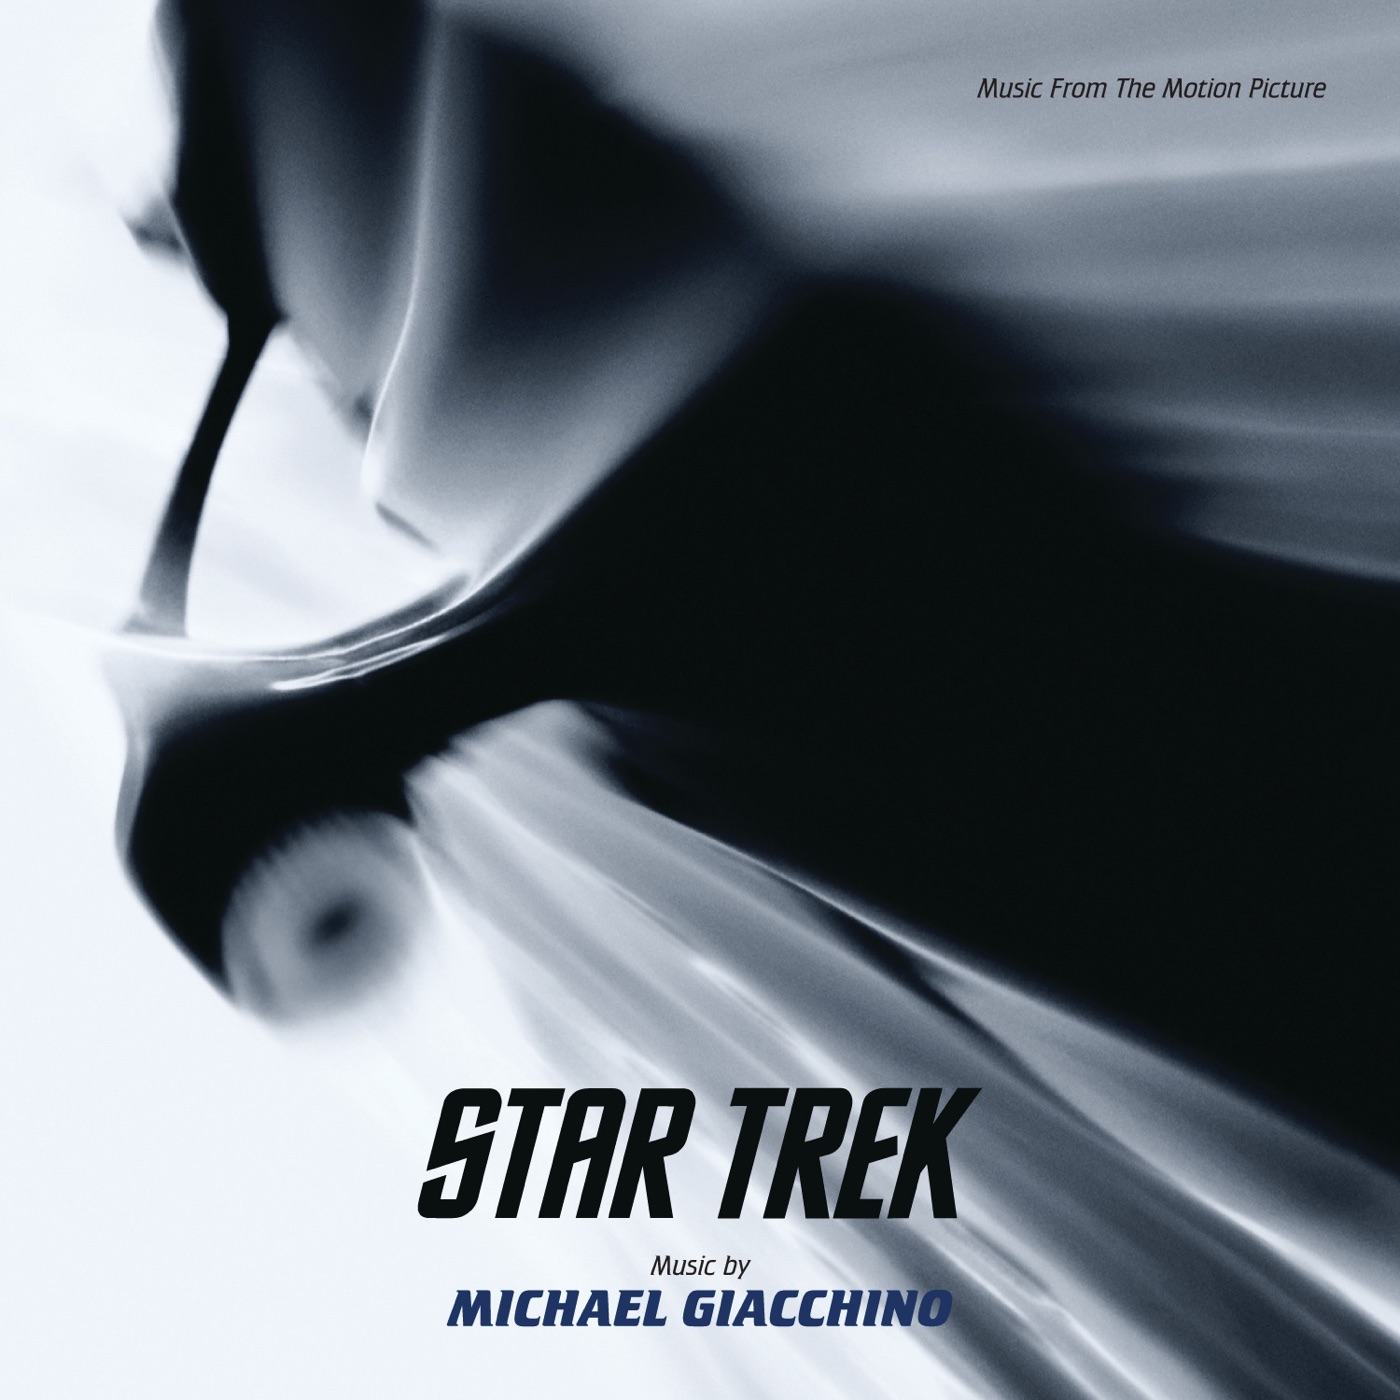 Star Trek by Michael Giacchino, Star Trek (Music From The Motion Picture)